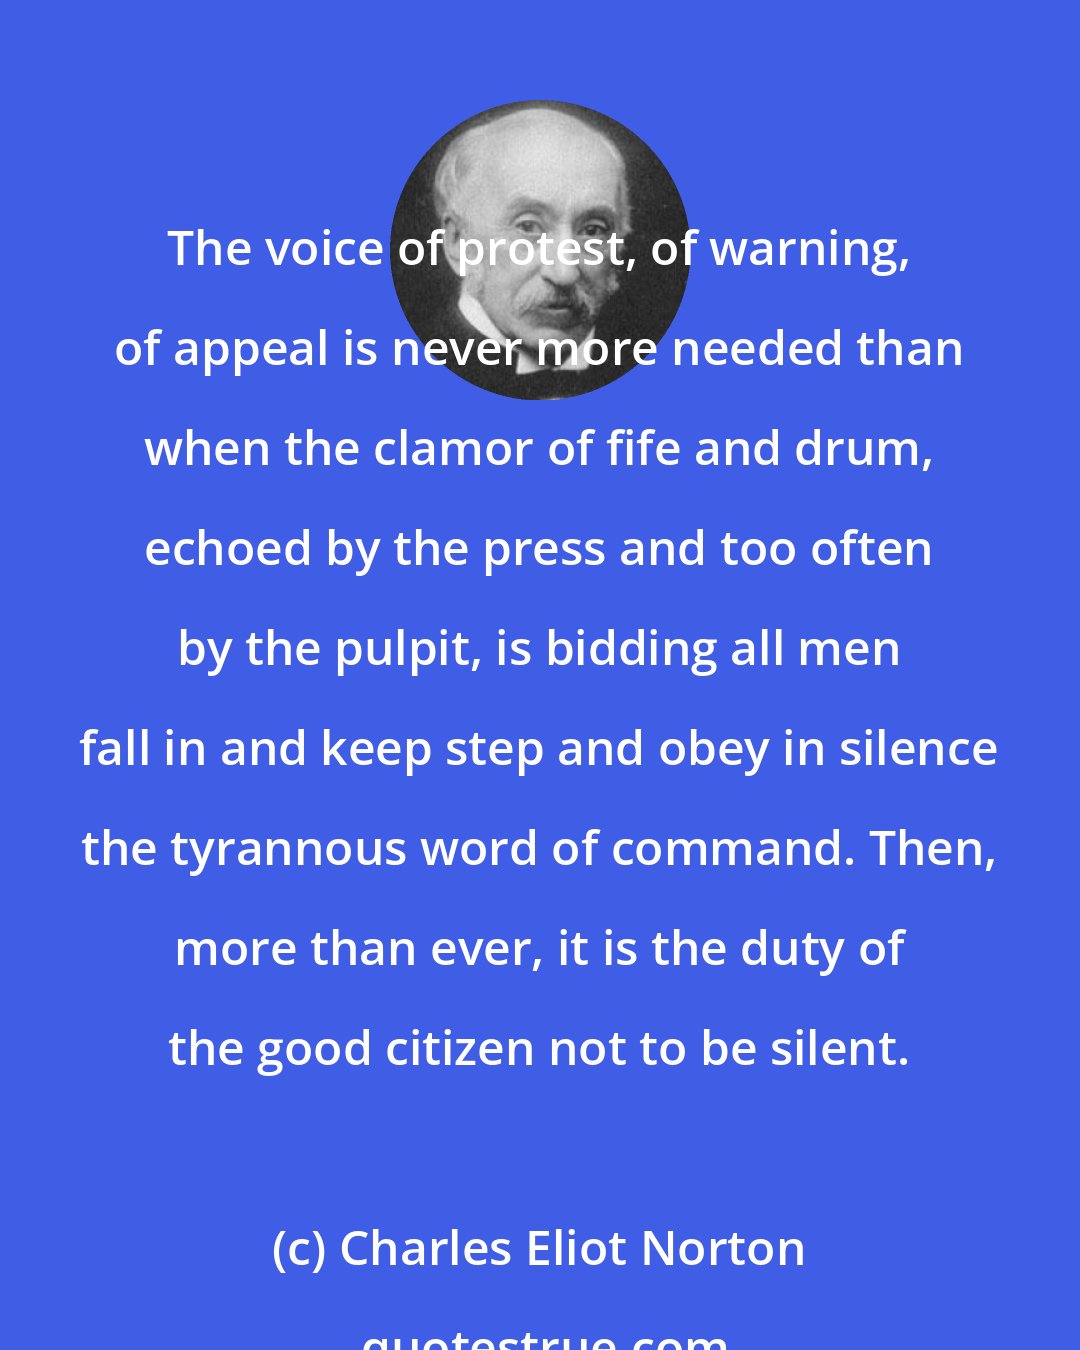 Charles Eliot Norton: The voice of protest, of warning, of appeal is never more needed than when the clamor of fife and drum, echoed by the press and too often by the pulpit, is bidding all men fall in and keep step and obey in silence the tyrannous word of command. Then, more than ever, it is the duty of the good citizen not to be silent.